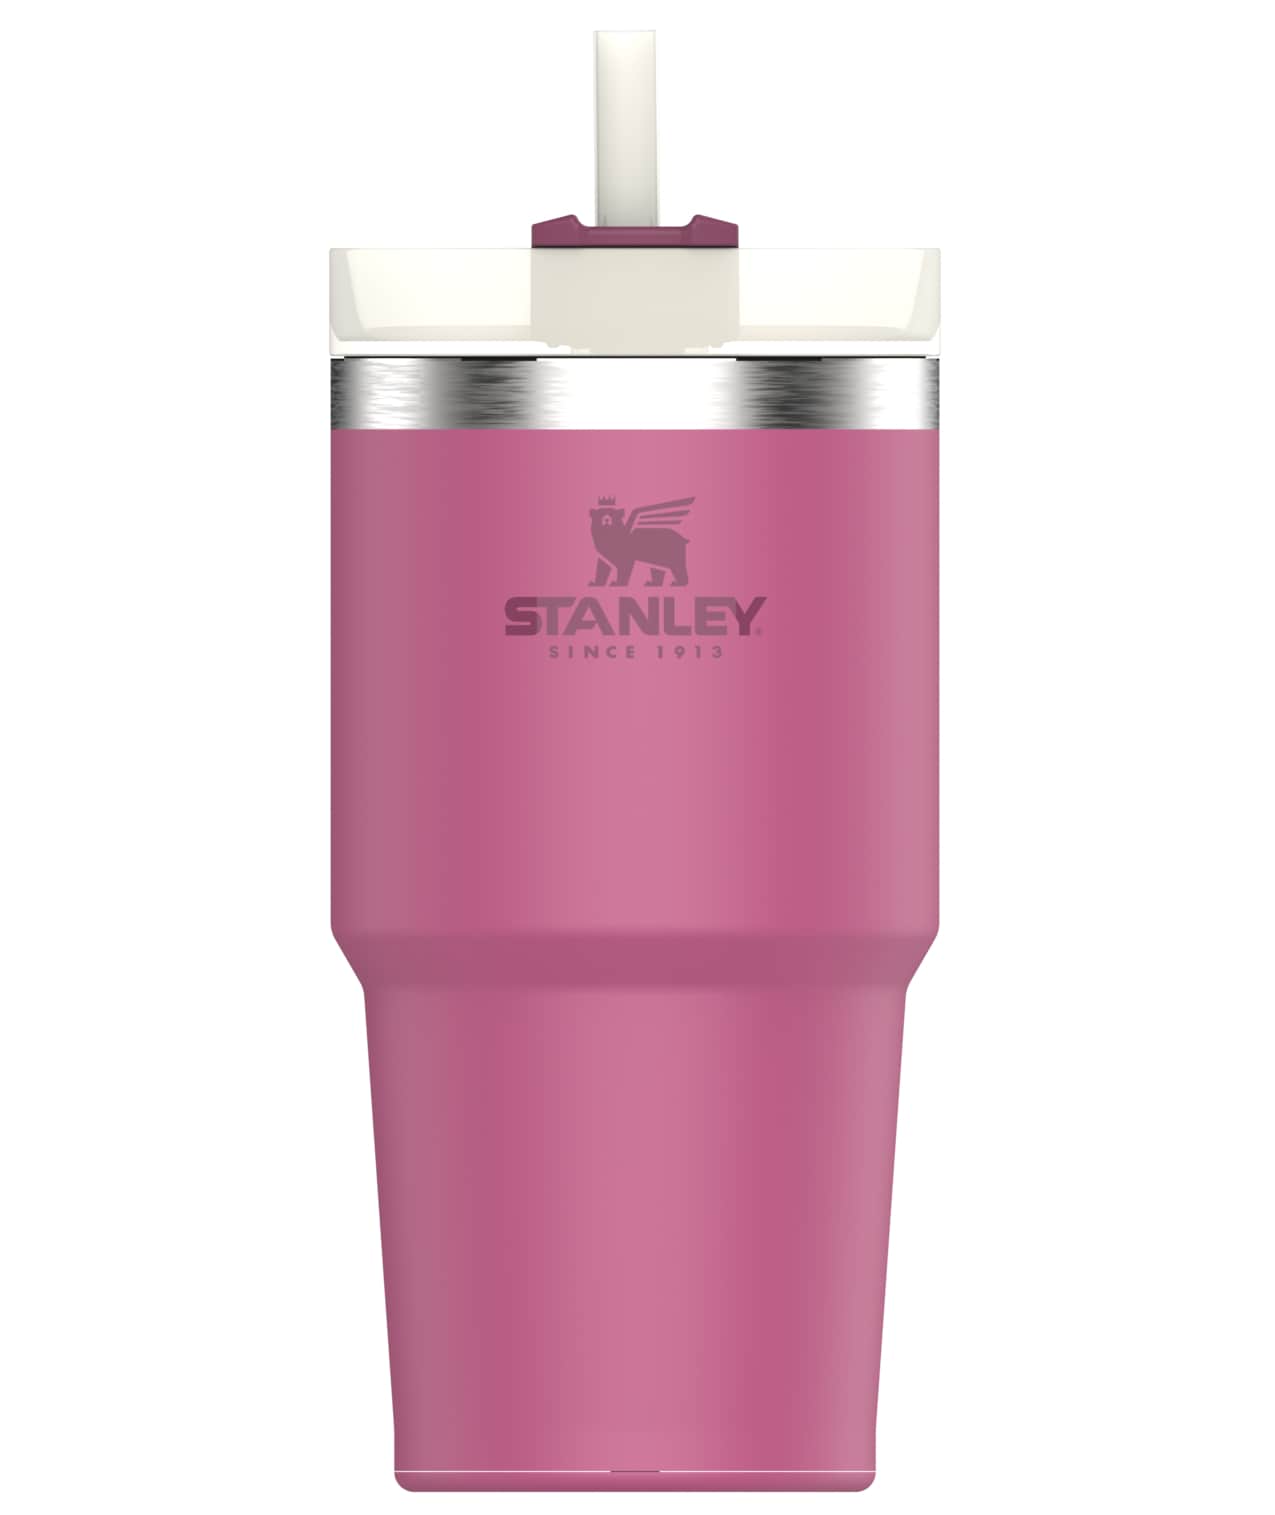 Stanley Quencher 20-fl oz Stainless Steel Insulated Water Bottle at